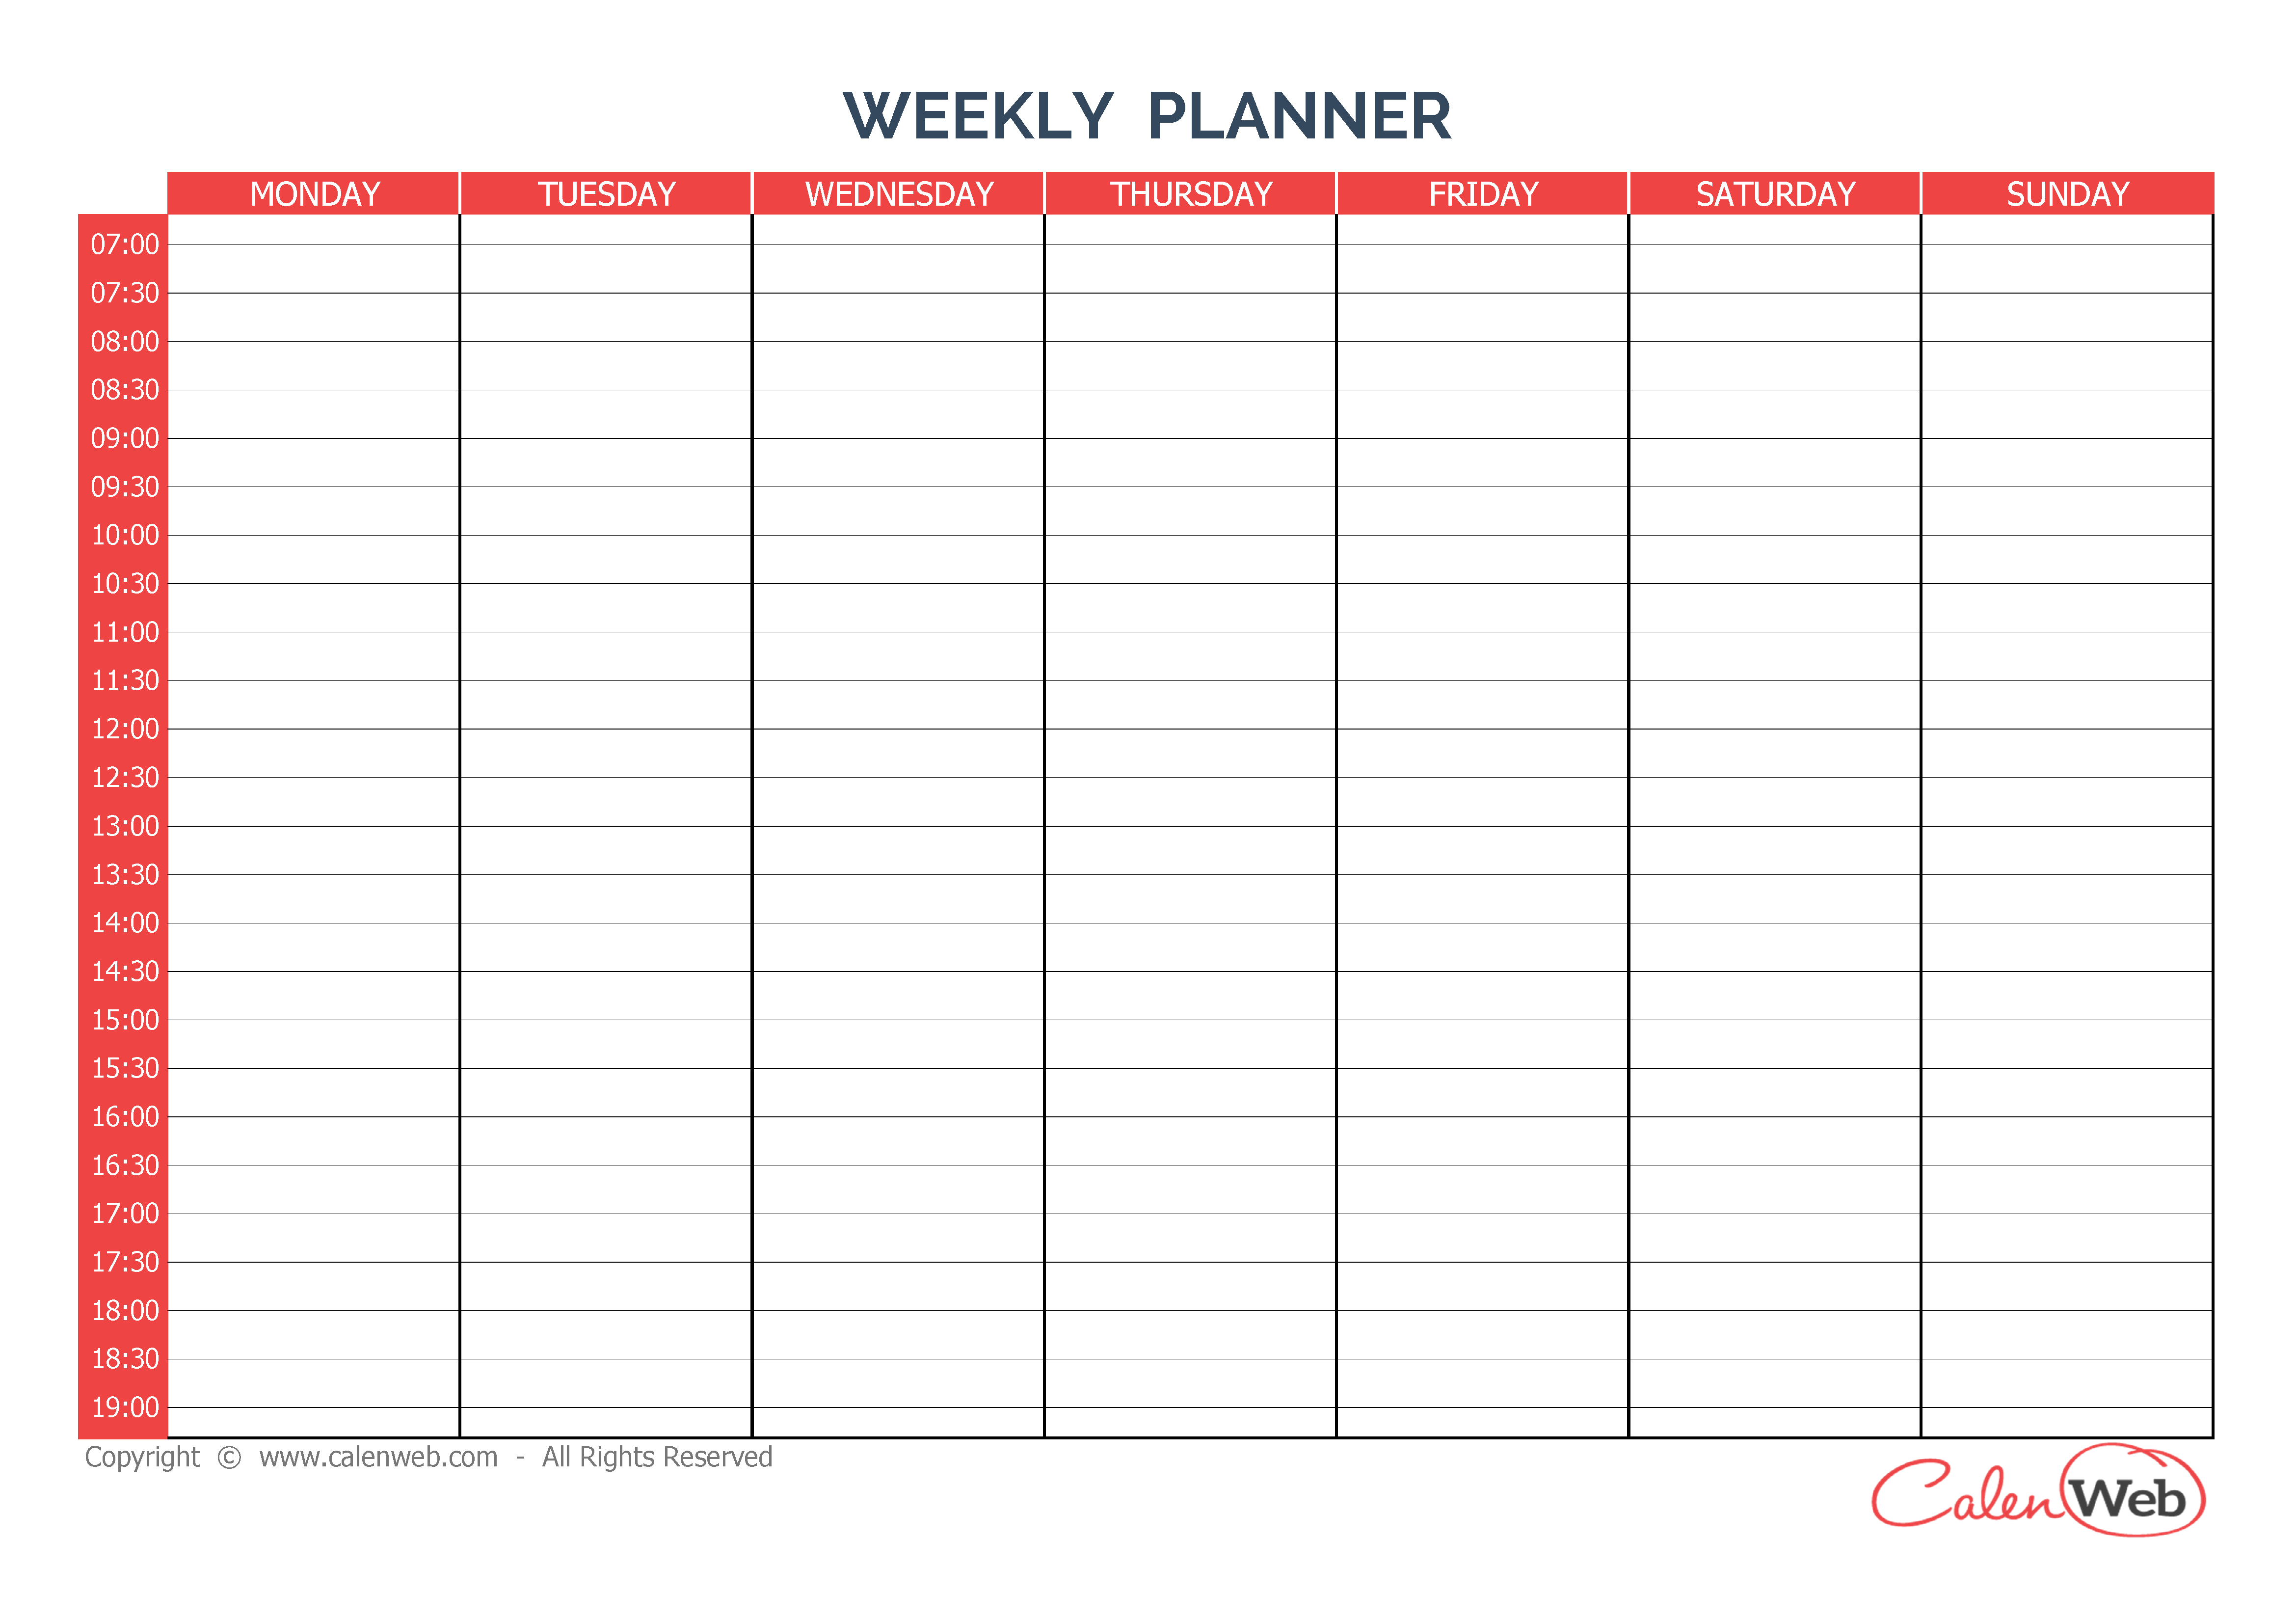 Weekly planner 7 days First day Monday A week of 7 days First day